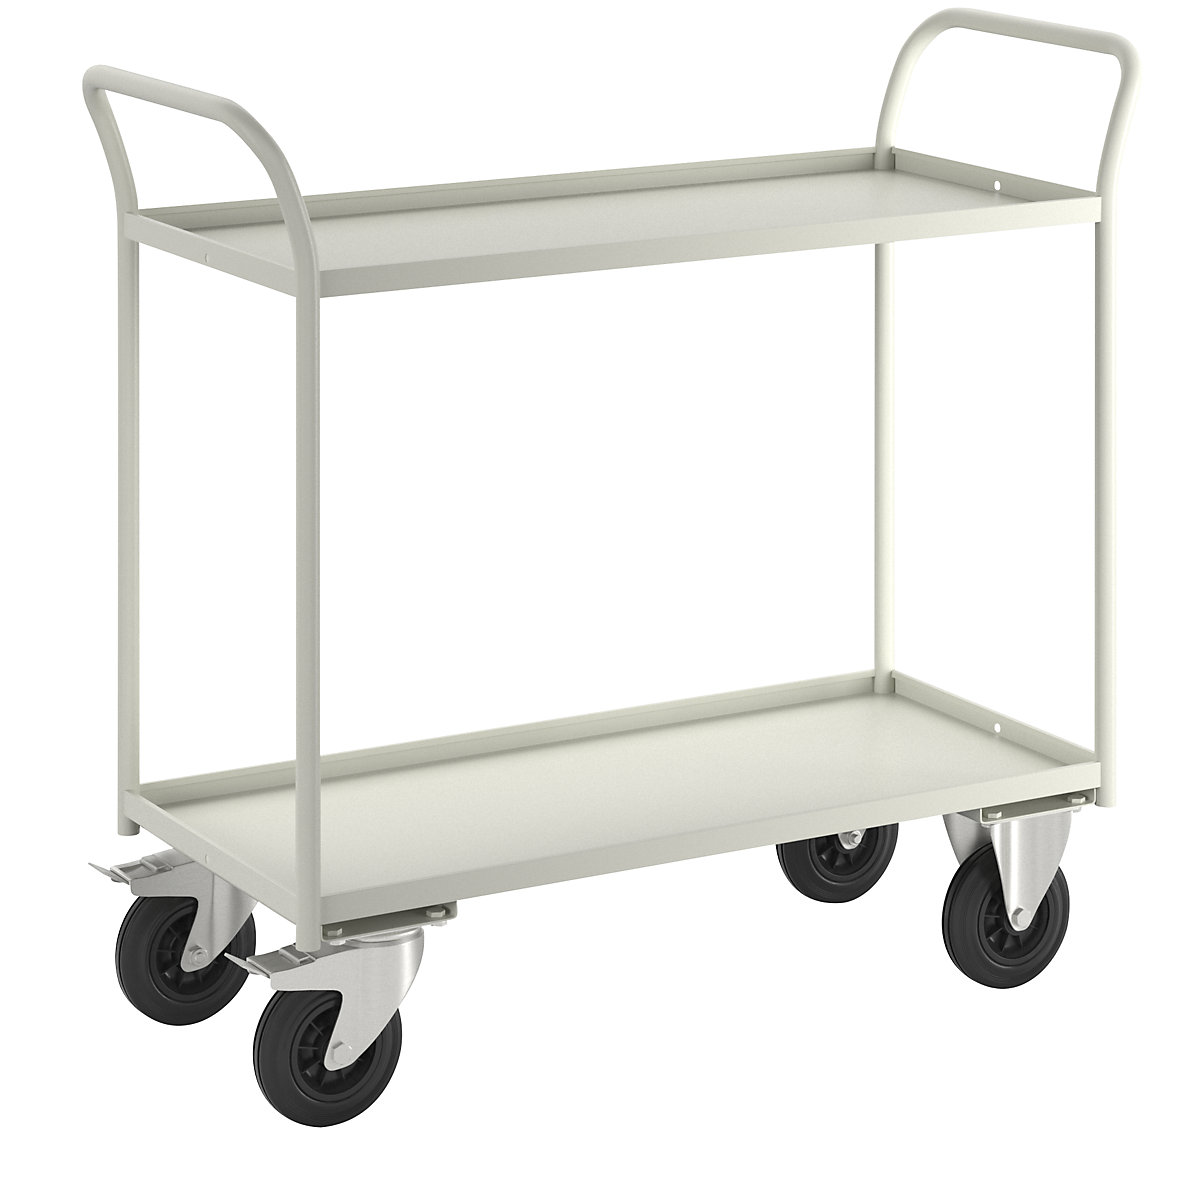 KM41 table trolley – Kongamek, 2 shelves with raised edges, LxWxH 1080 x 450 x 1000 mm, white, 2 swivel castors with stops, 2 fixed castors-8